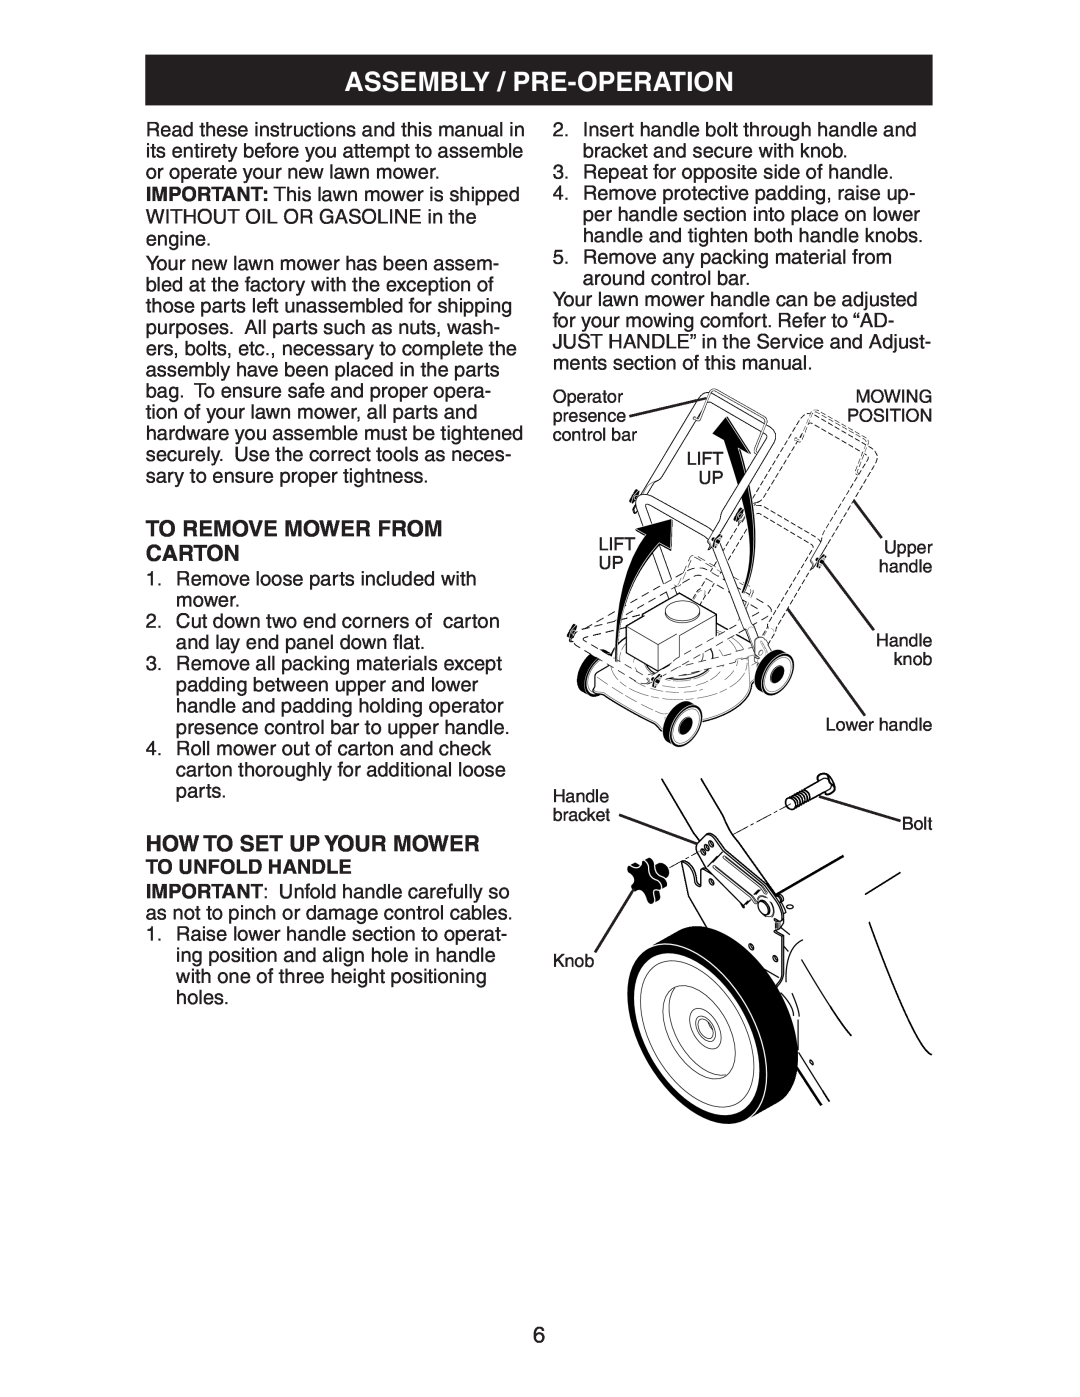 Kenmore 917.37707 Assembly / Pre-Operation, To Remove Mower From Carton, How To Set Up Your Mower, To Unfold Handle 